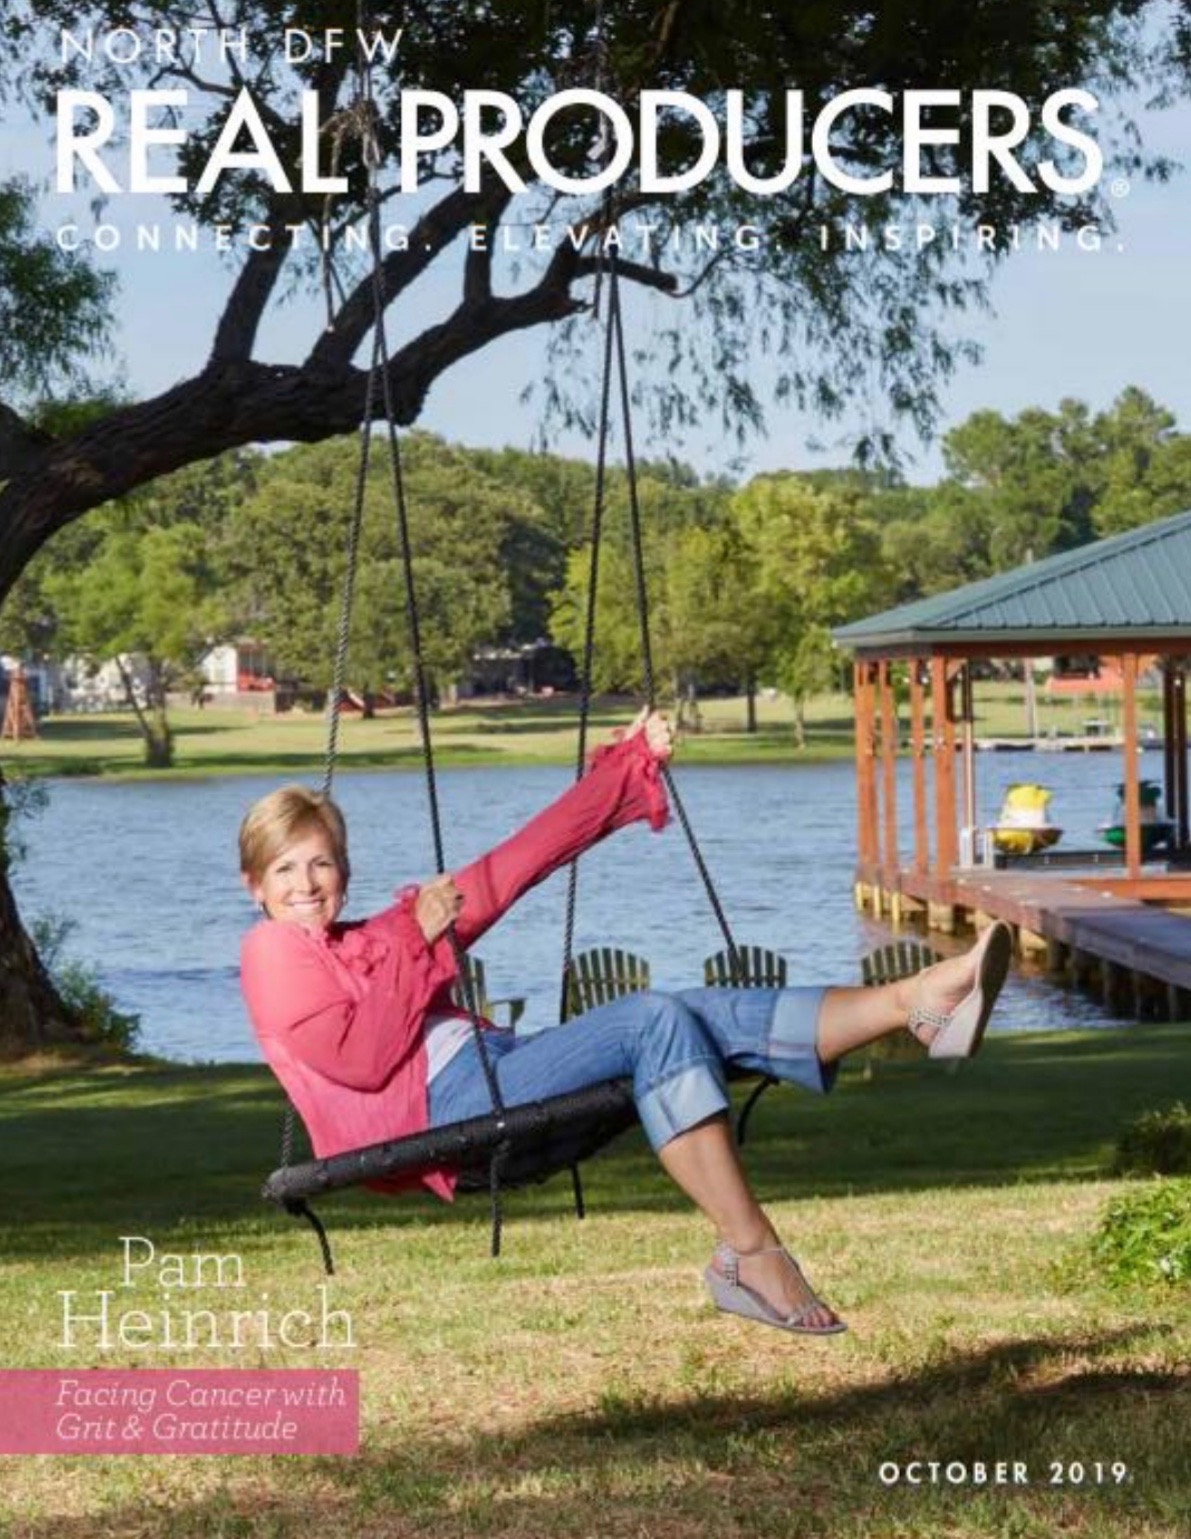 Real Producer Magazine - Cover Story for October 2019 - Pam Heinrich - Facing Cancer with Grit and Gratitude